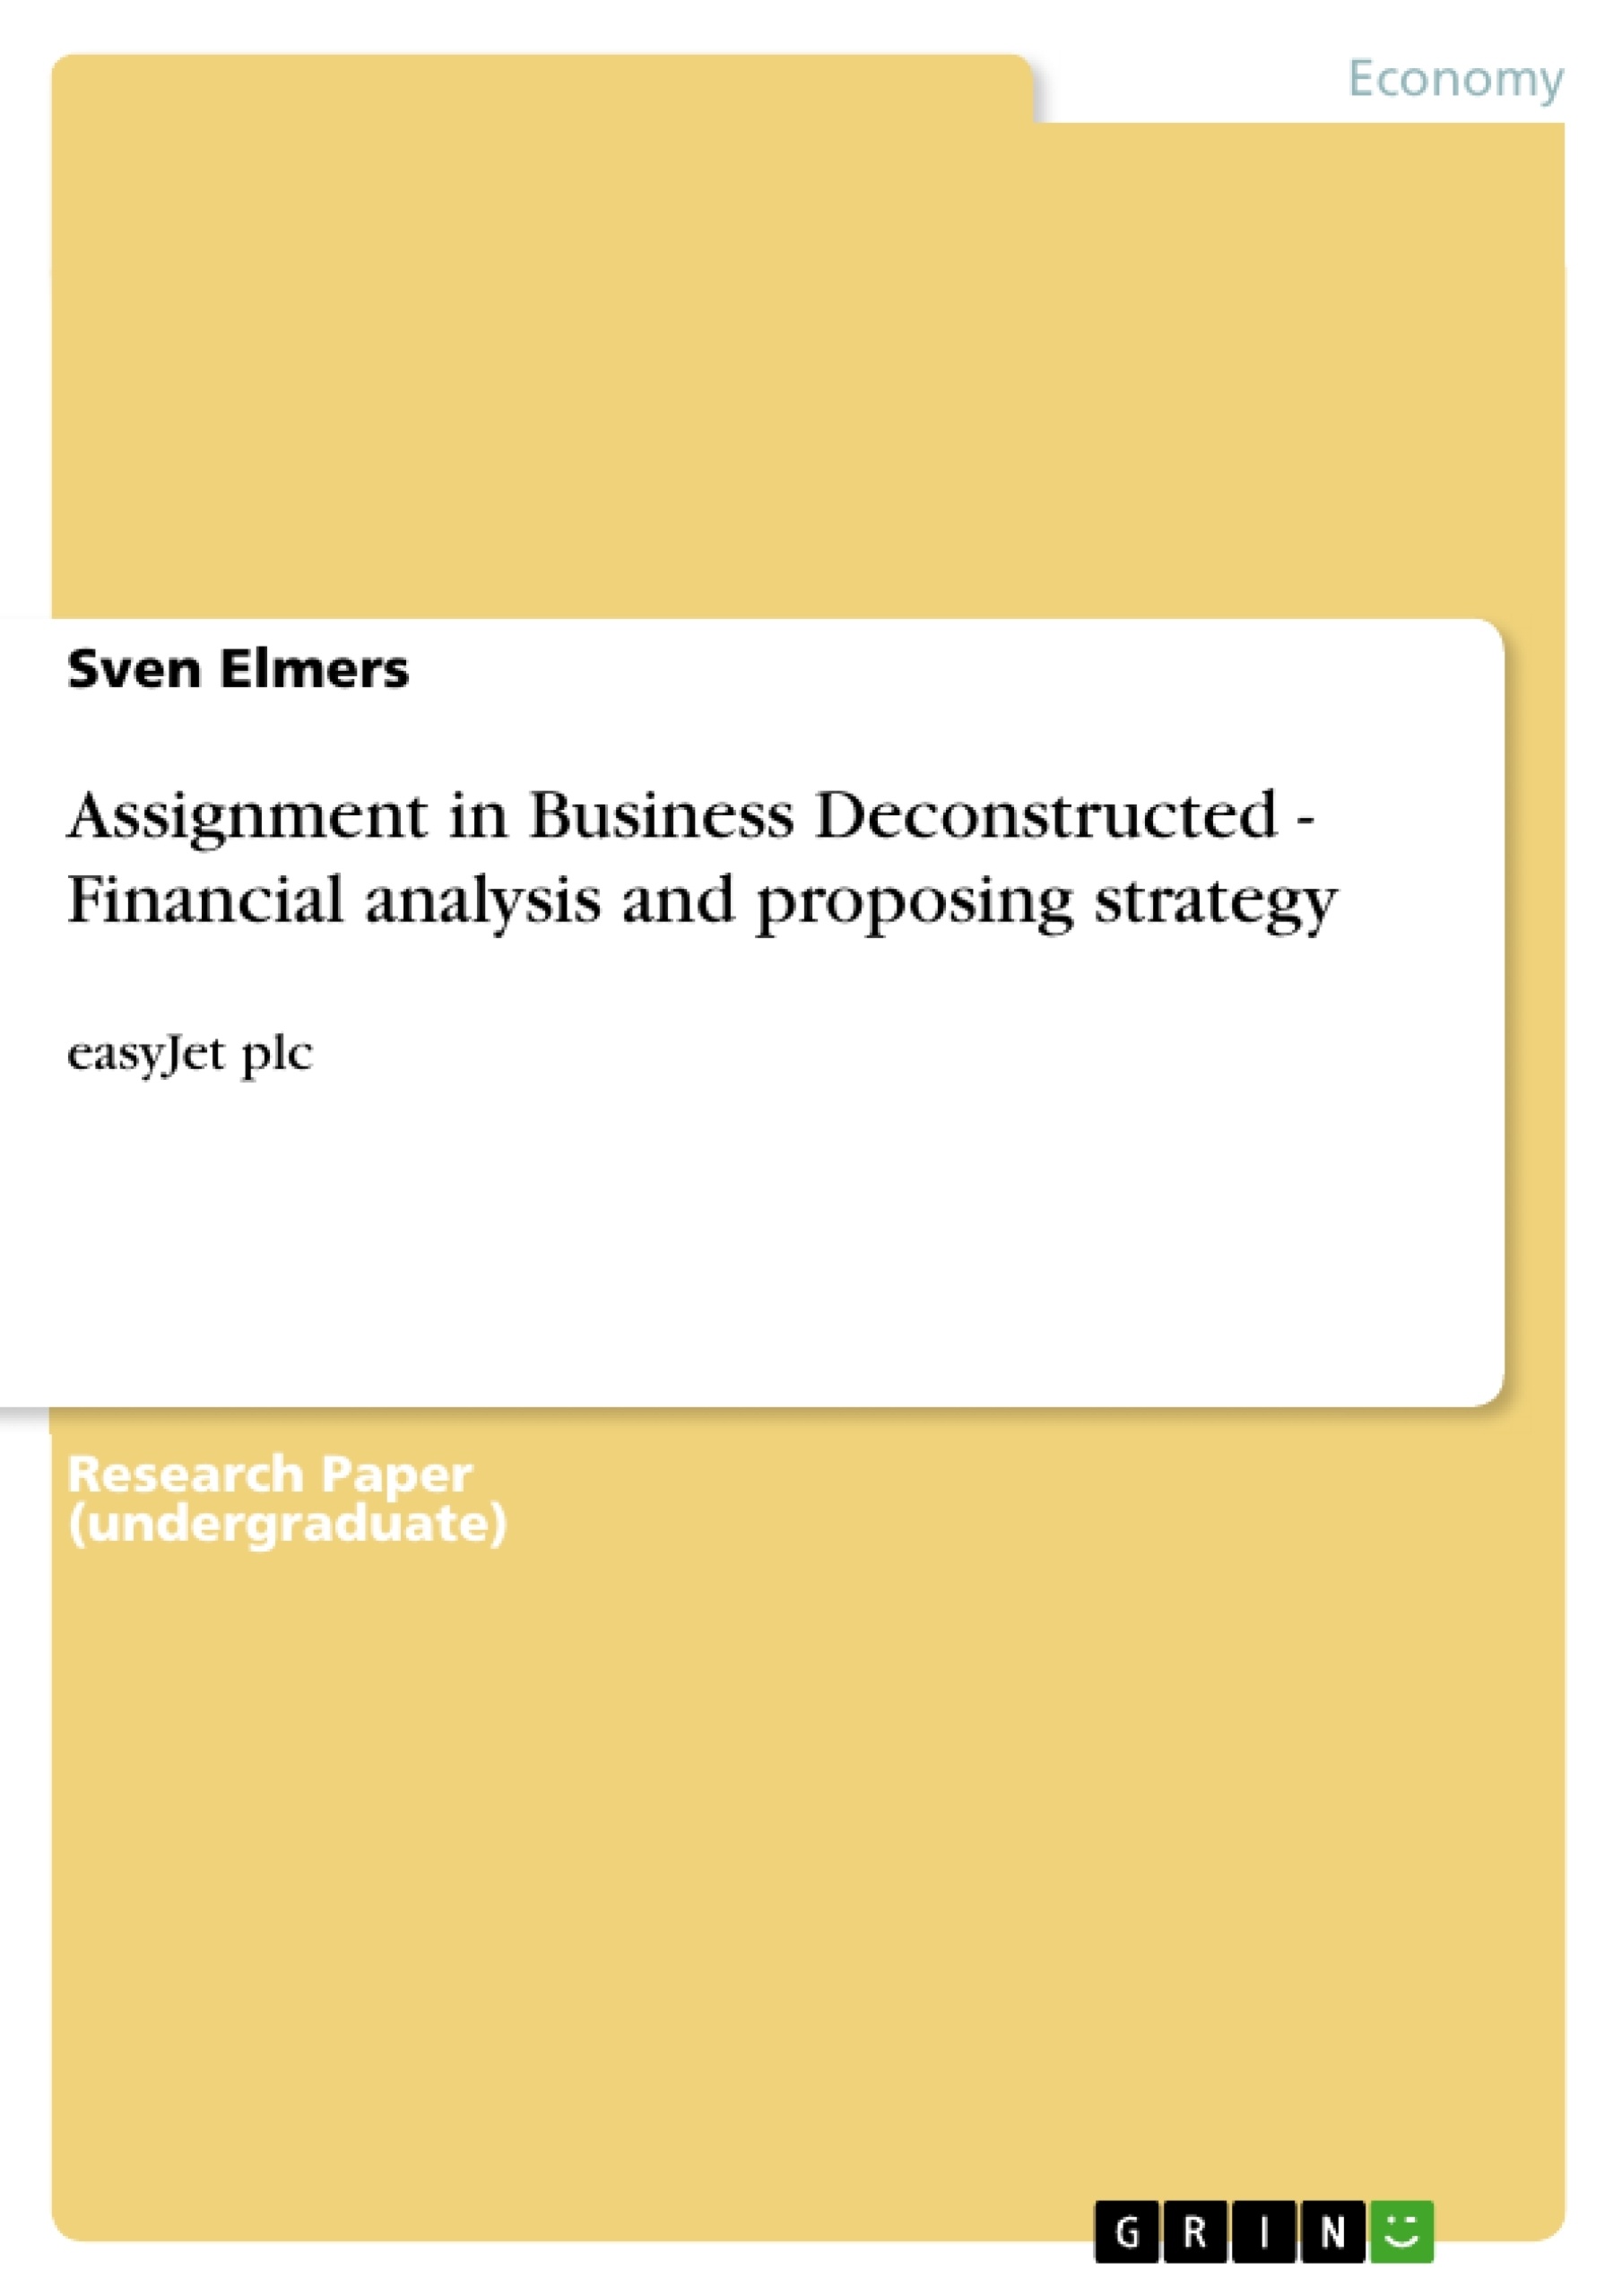 Title: Assignment in Business Deconstructed - Financial analysis and proposing strategy